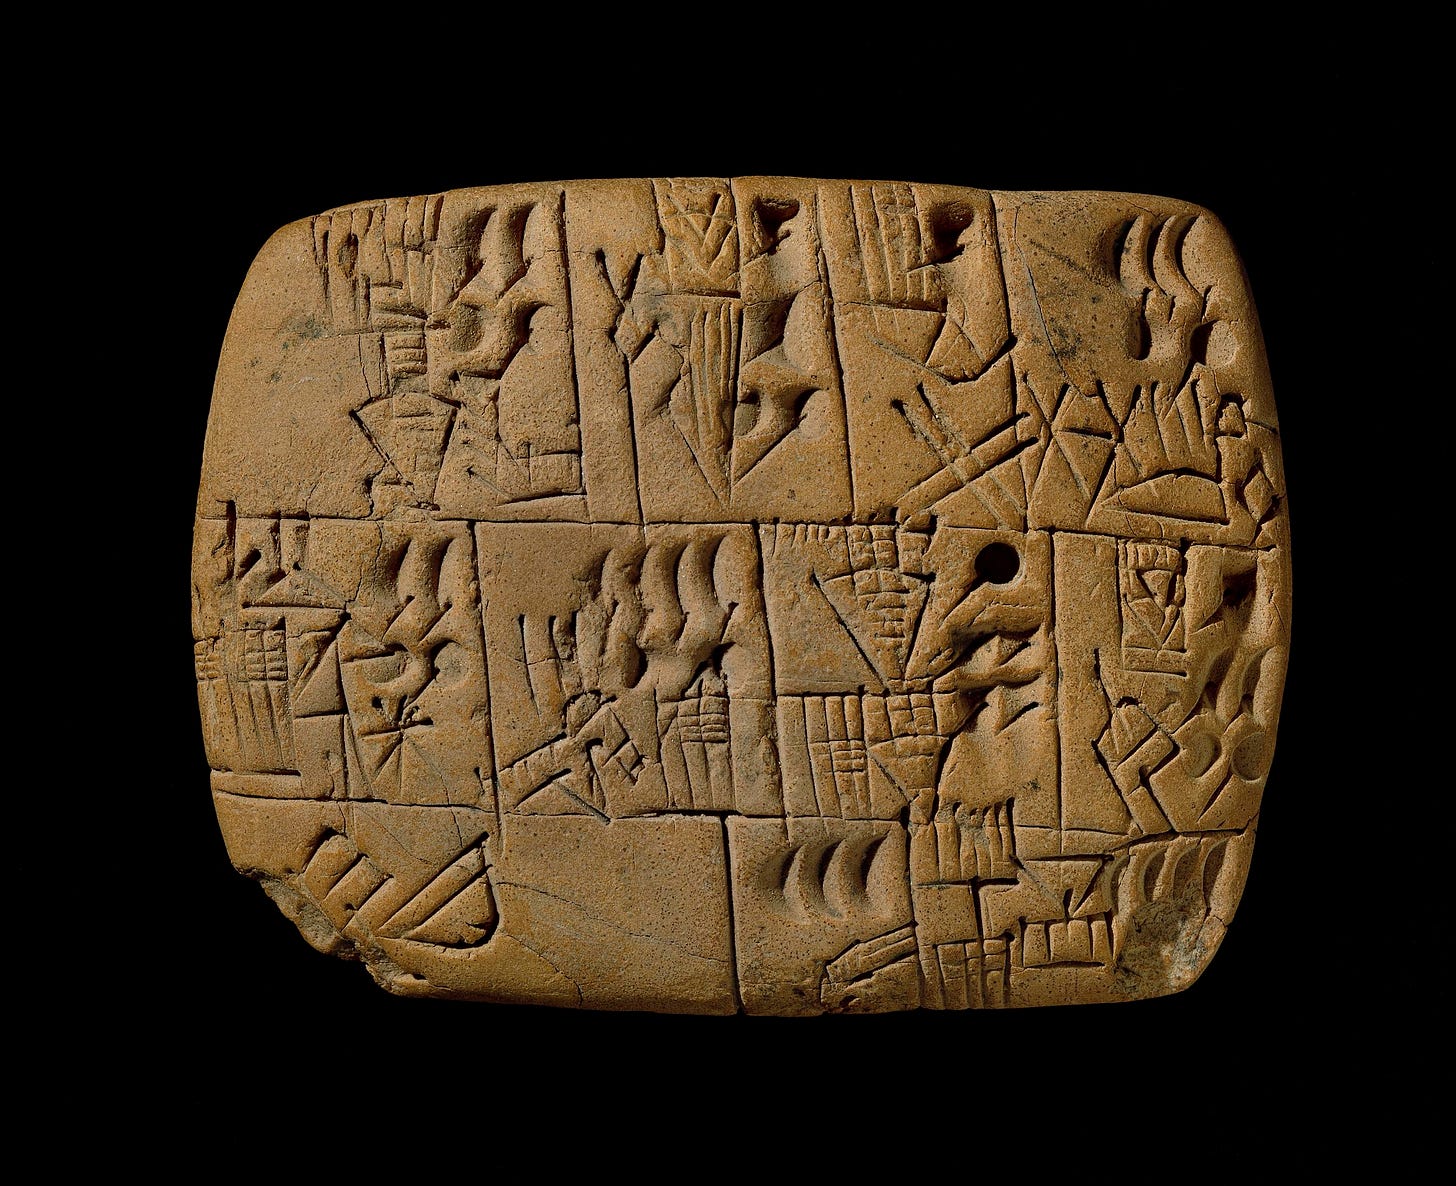 Early writing tablet recording the allocation of beer, 3100–3000 B.C.E, Late Prehistoric period, clay, probably from southern Iraq. (© Trustees of the British Museum) The symbol for beer, an upright jar with pointed base, appears three times on the tablet. Beer was the most popular drink in Mesopotamia and was issued as rations to workers. Alongside the pictographs are five different shaped impressions, representing numerical symbols. Over time these signs became more abstract and wedge-like, or “cuneiform.” The signs are grouped into boxes and, at this early date, are usually read from top to bottom and right to left. One sign, in the bottom row on the left, shows a bowl tipped towards a schematic human head. This is the sign for “to eat.”